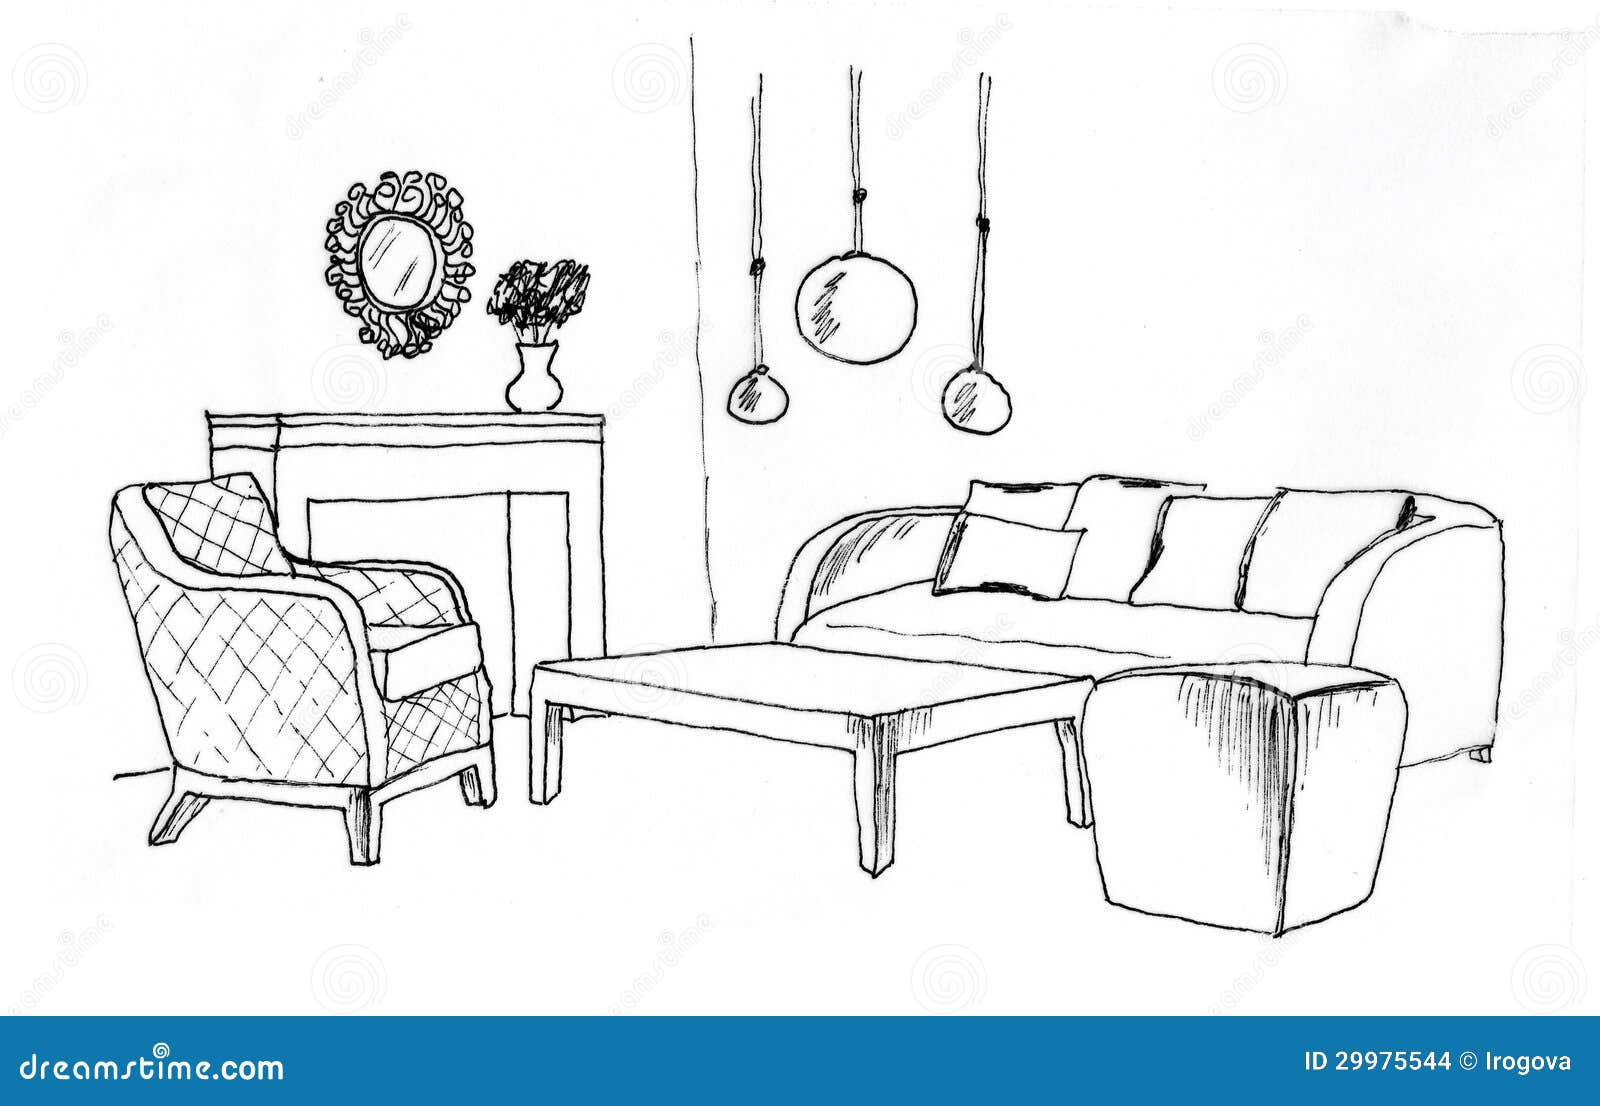 clipart drawing room - photo #40